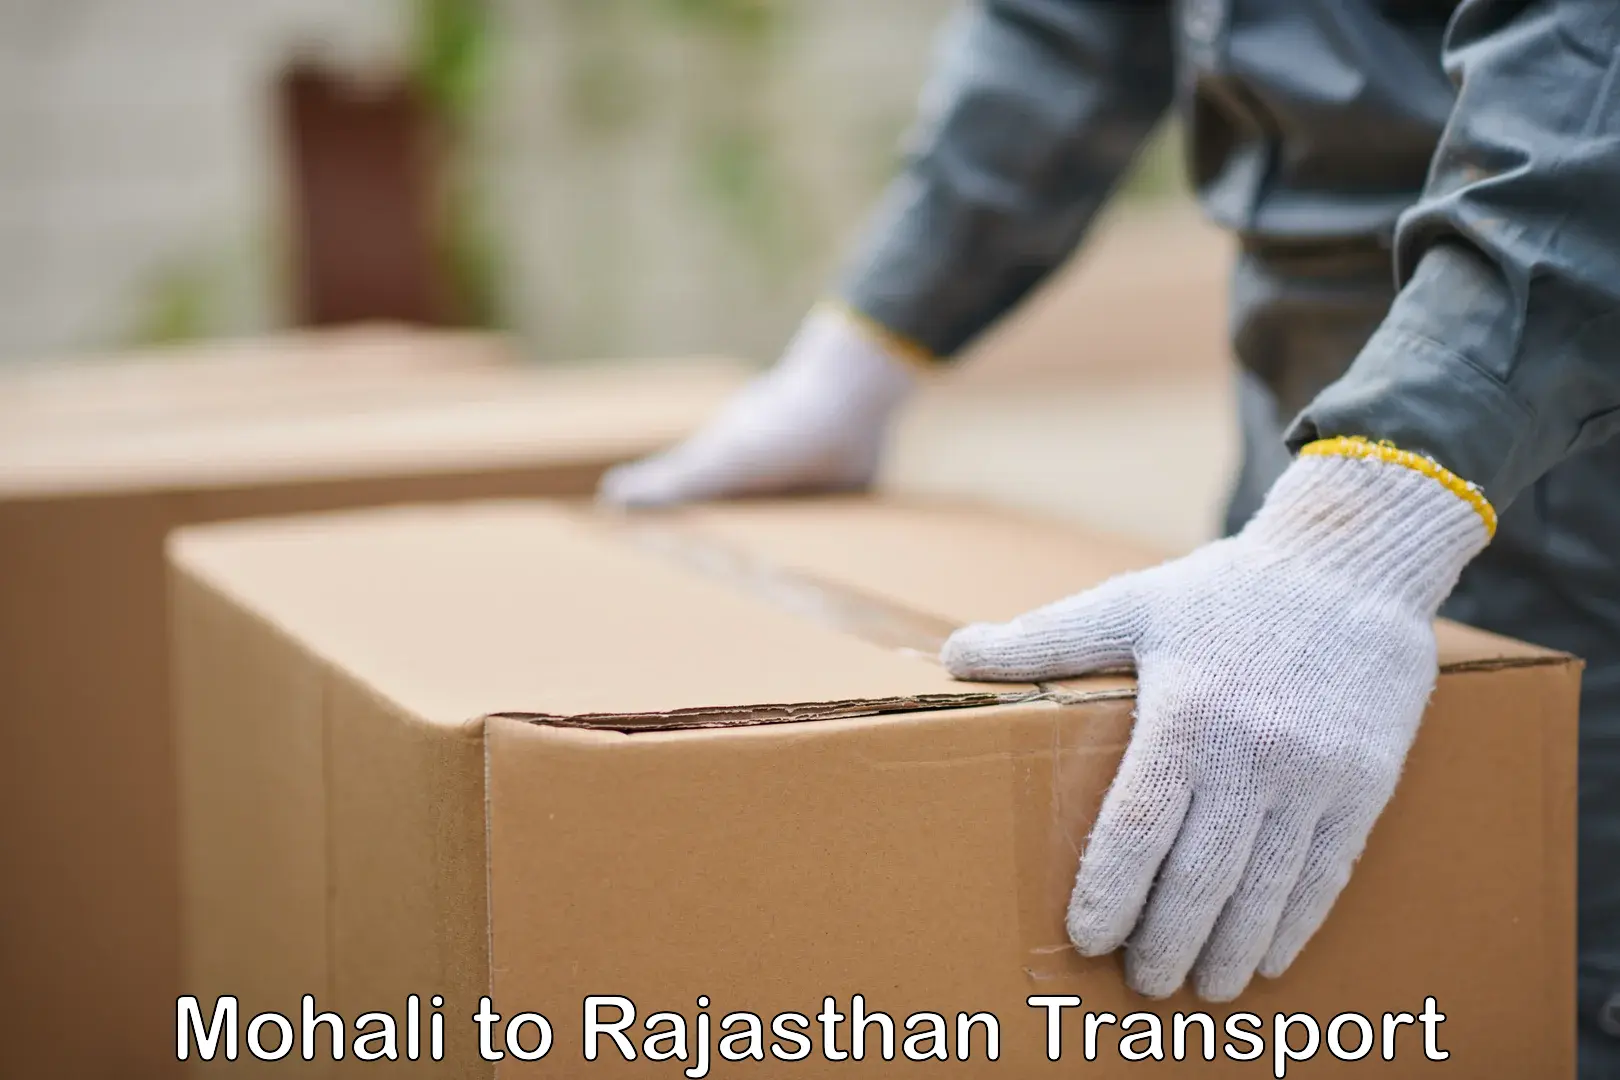 Goods delivery service Mohali to Pratapgarh Rajasthan